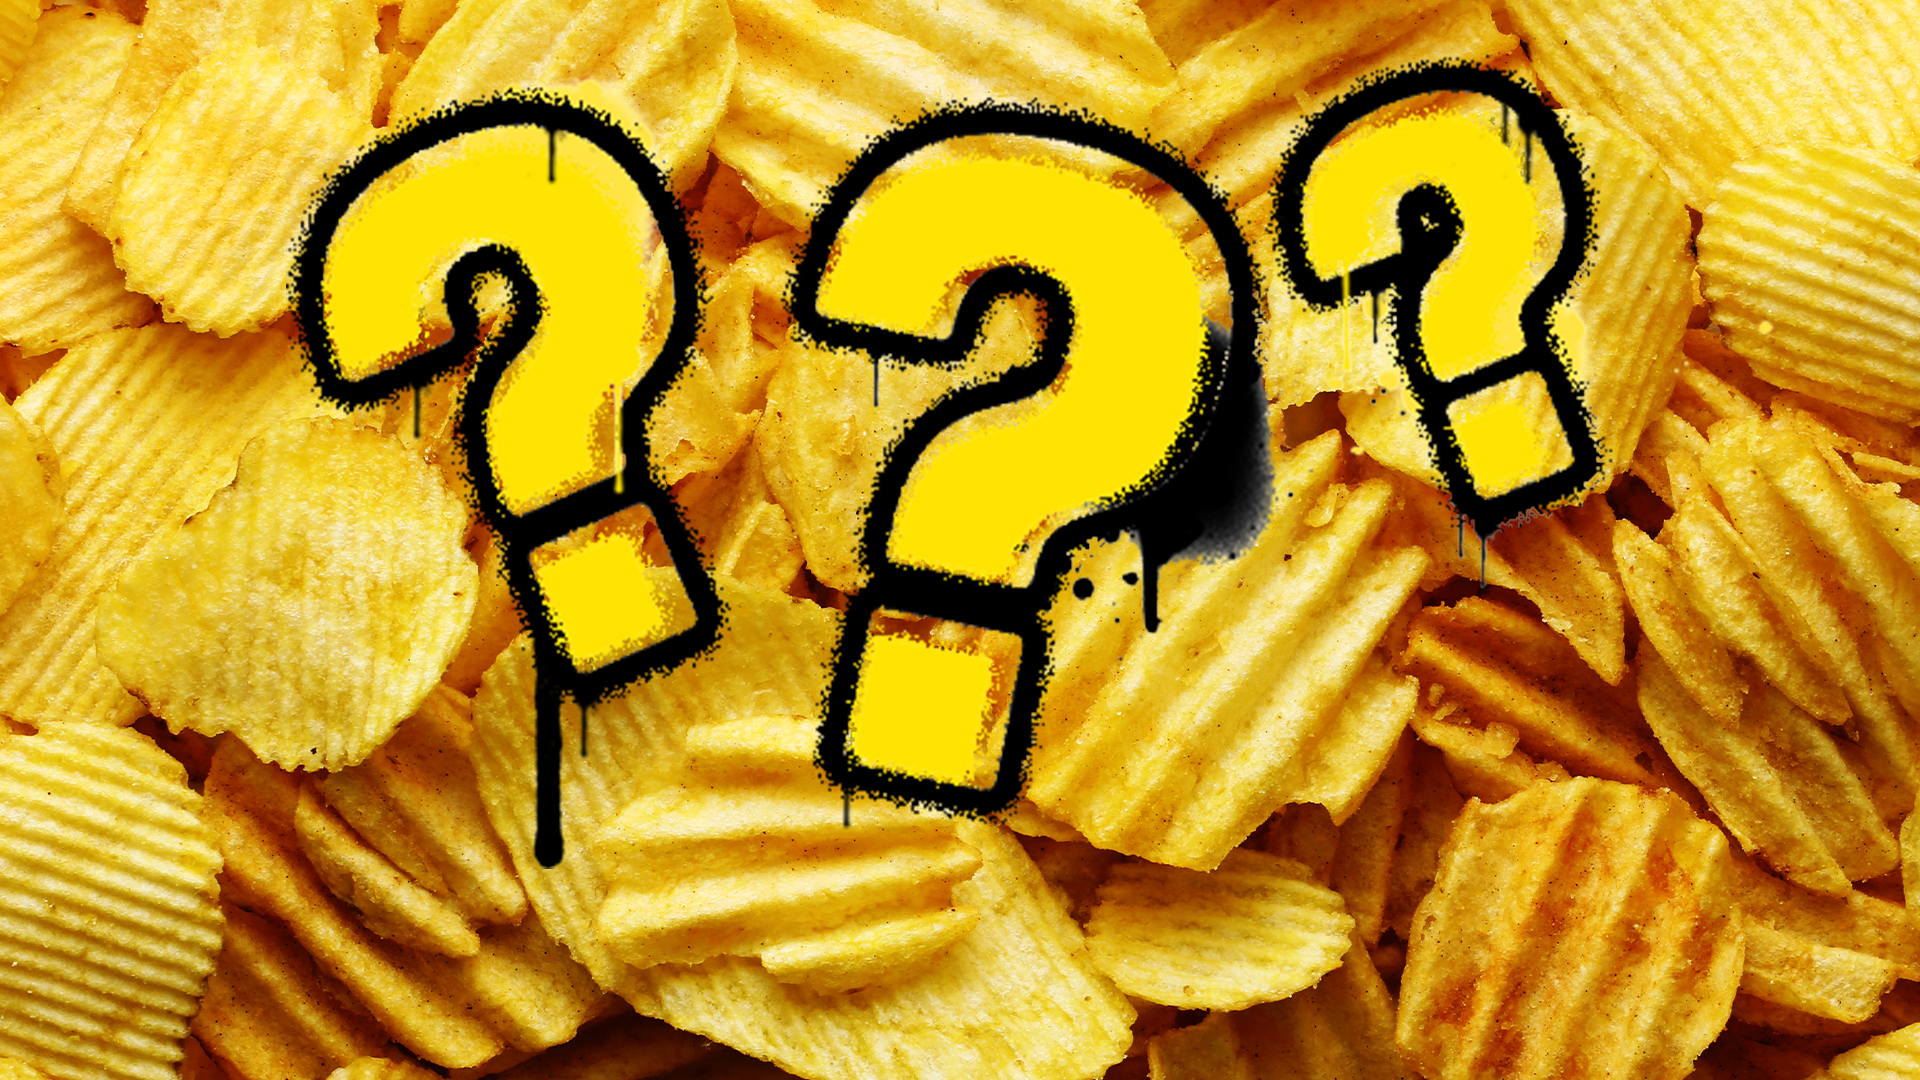 Crisps and question marks